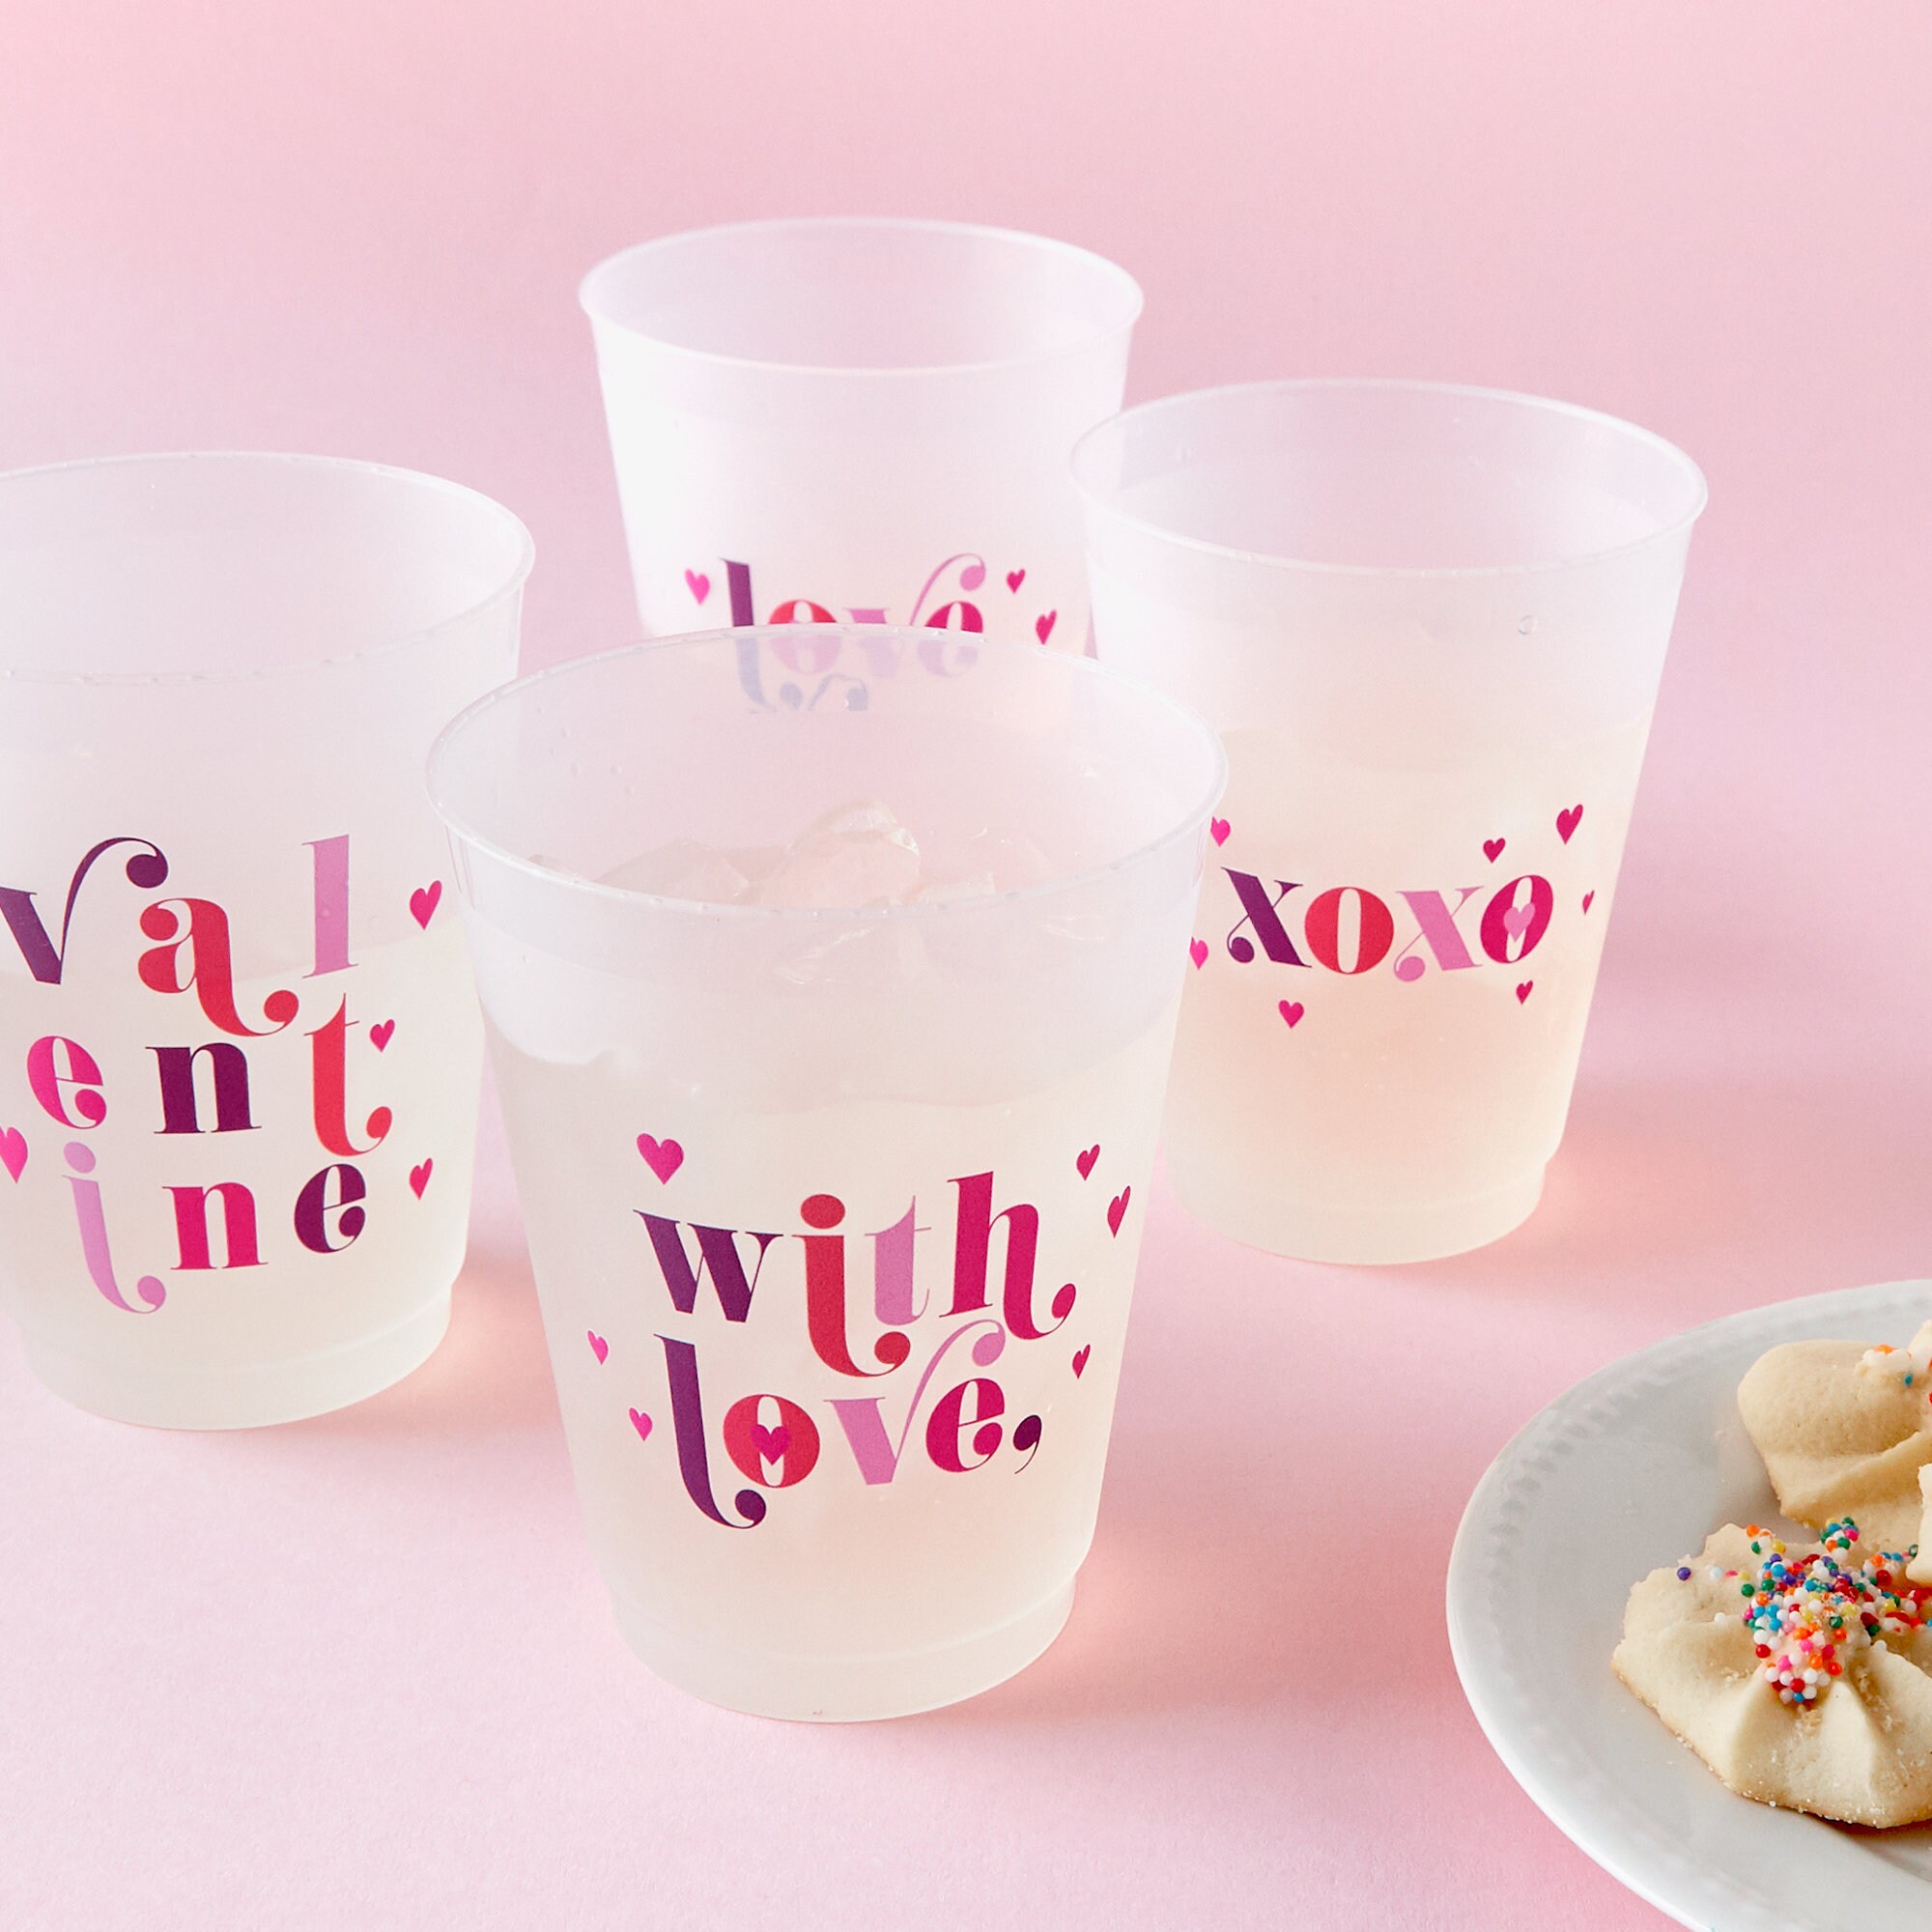 HAPPY VALENTINE'S DAY HEARTS FROST FLEX CUPS - Magpies Gifts